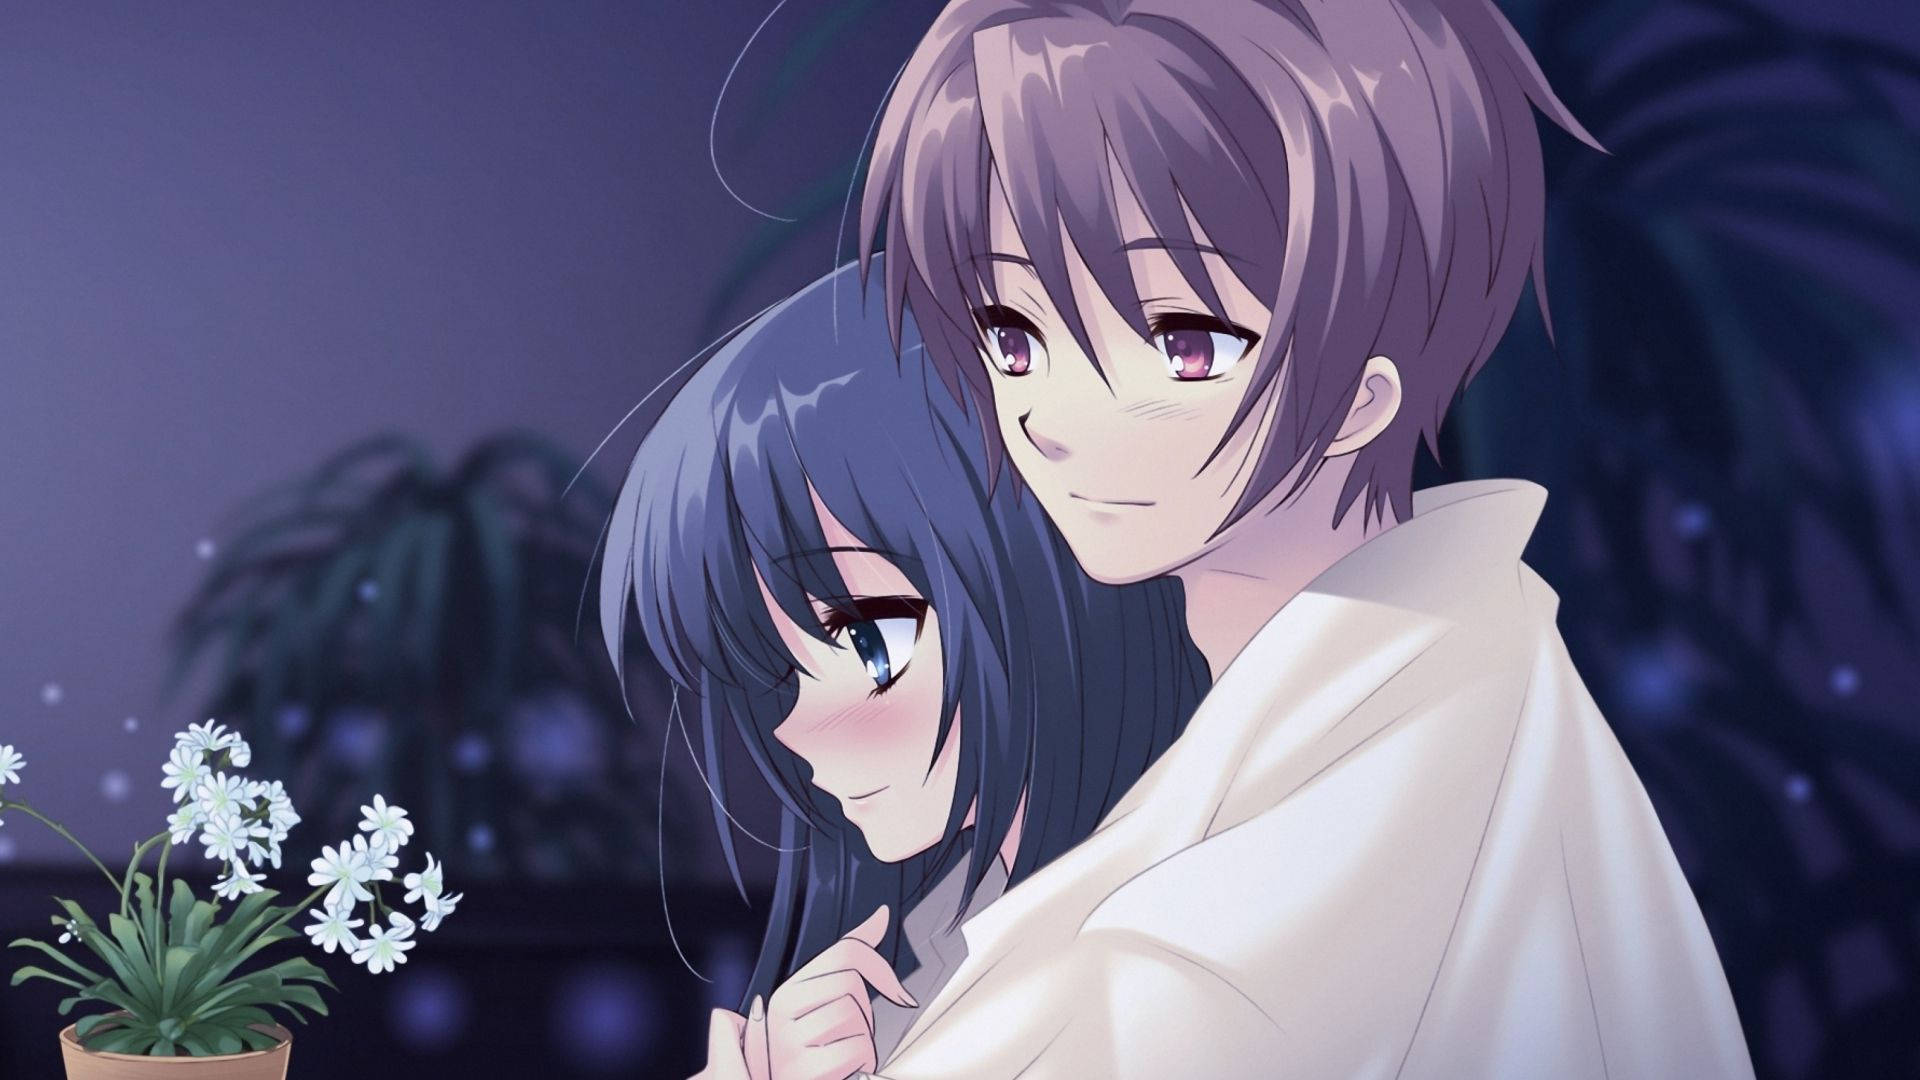 Cute Couples Hug Anime, HD Png Download - 1024x1341 PNG - DLF.PT